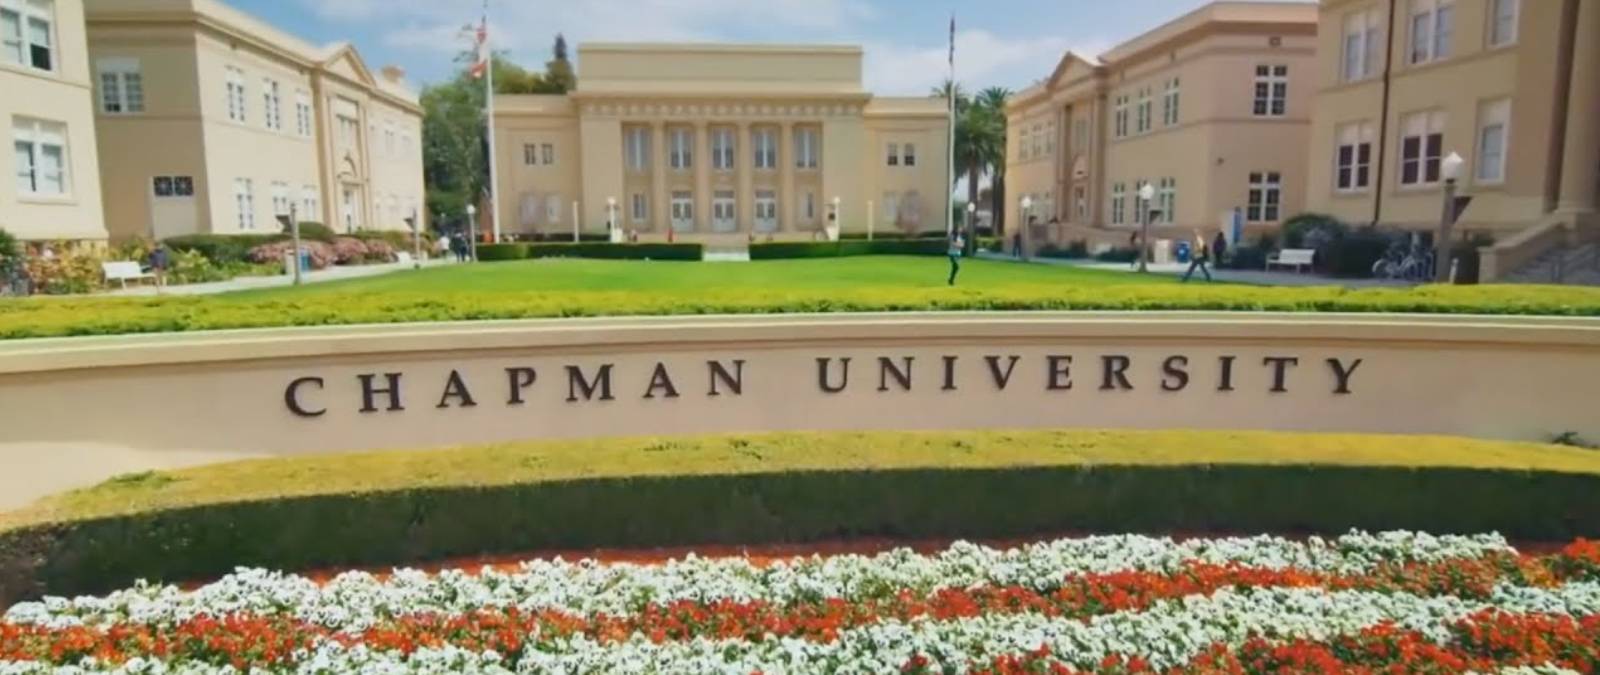 IULM and Chapman University to promote student mobility and international collaboration